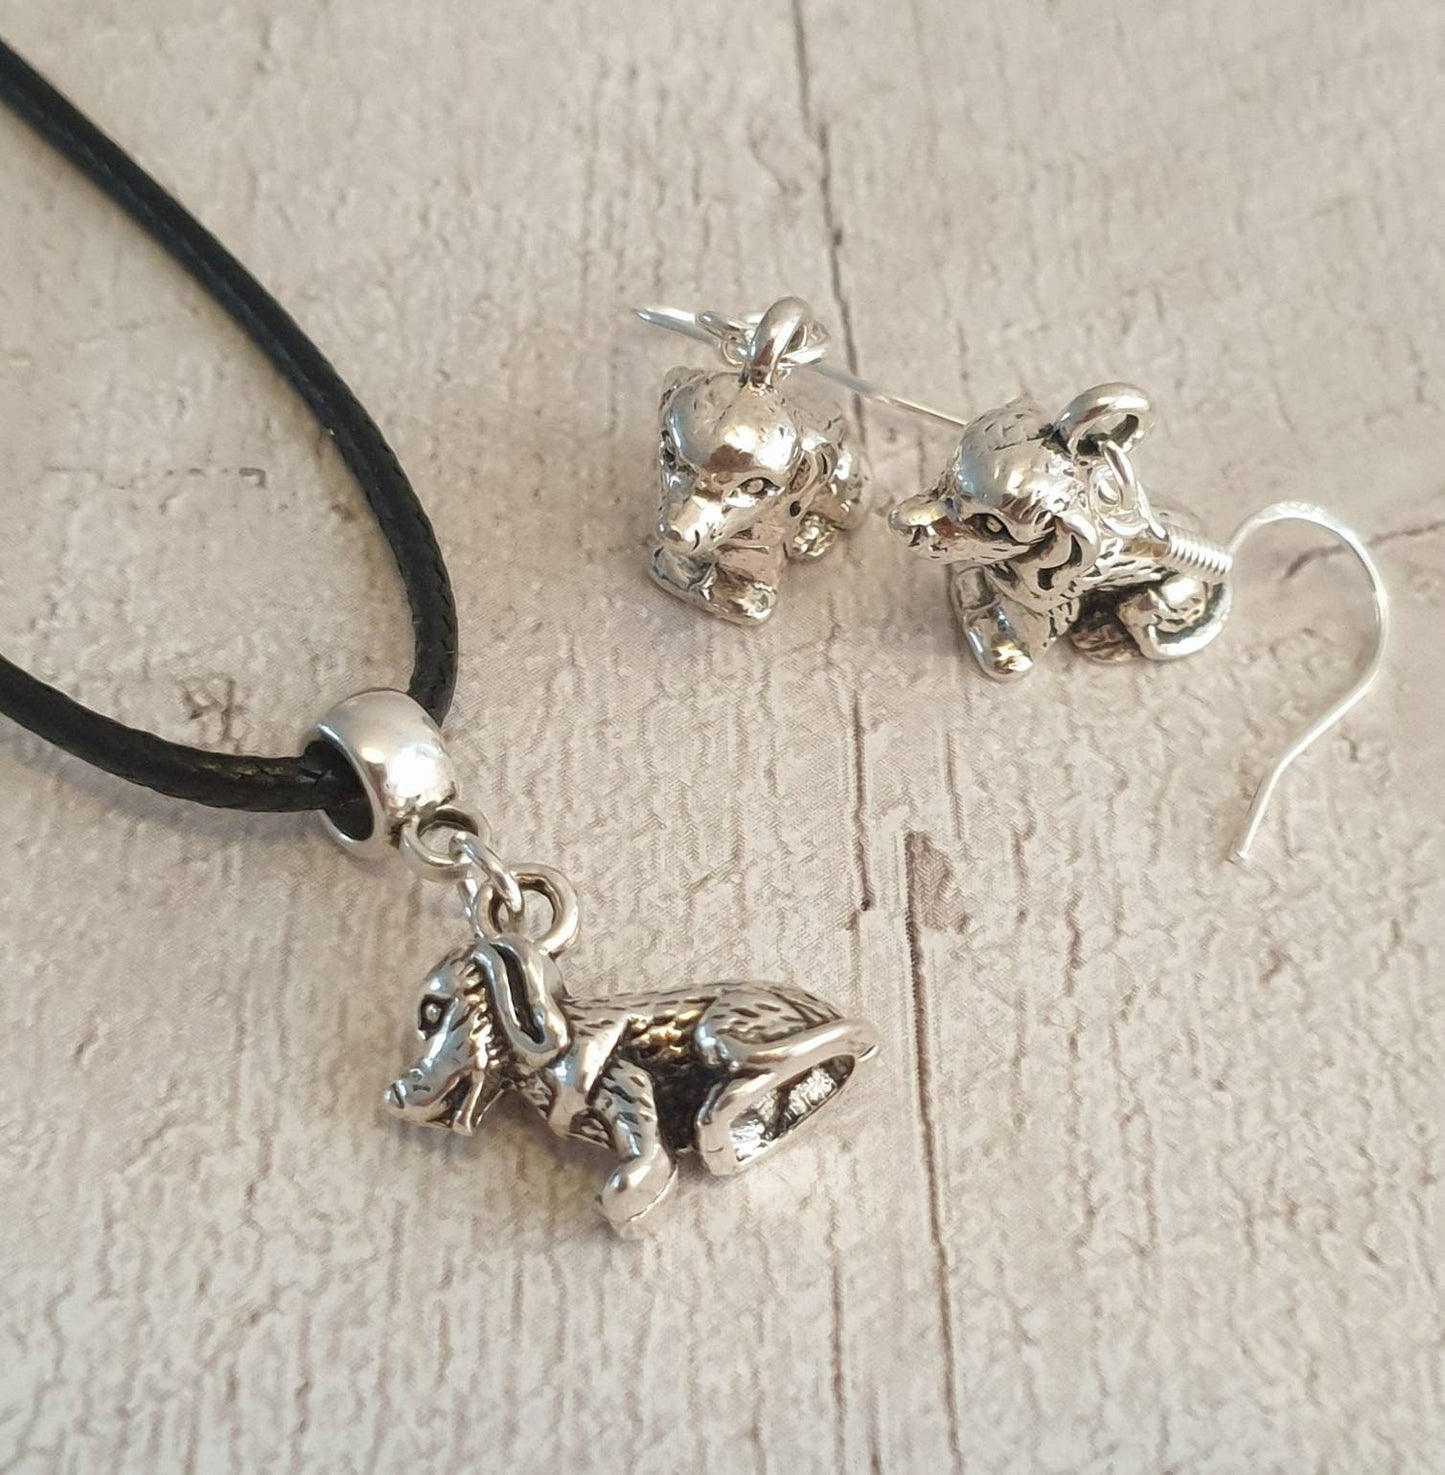 Handmade Antique Silver Dog Charm Jewellery Set, Dangly Earring And Necklace Set In Gift Bag, Cord And Chain Options - Premium  from Etsy - Just £8.99! Shop now at Uniquely Holt